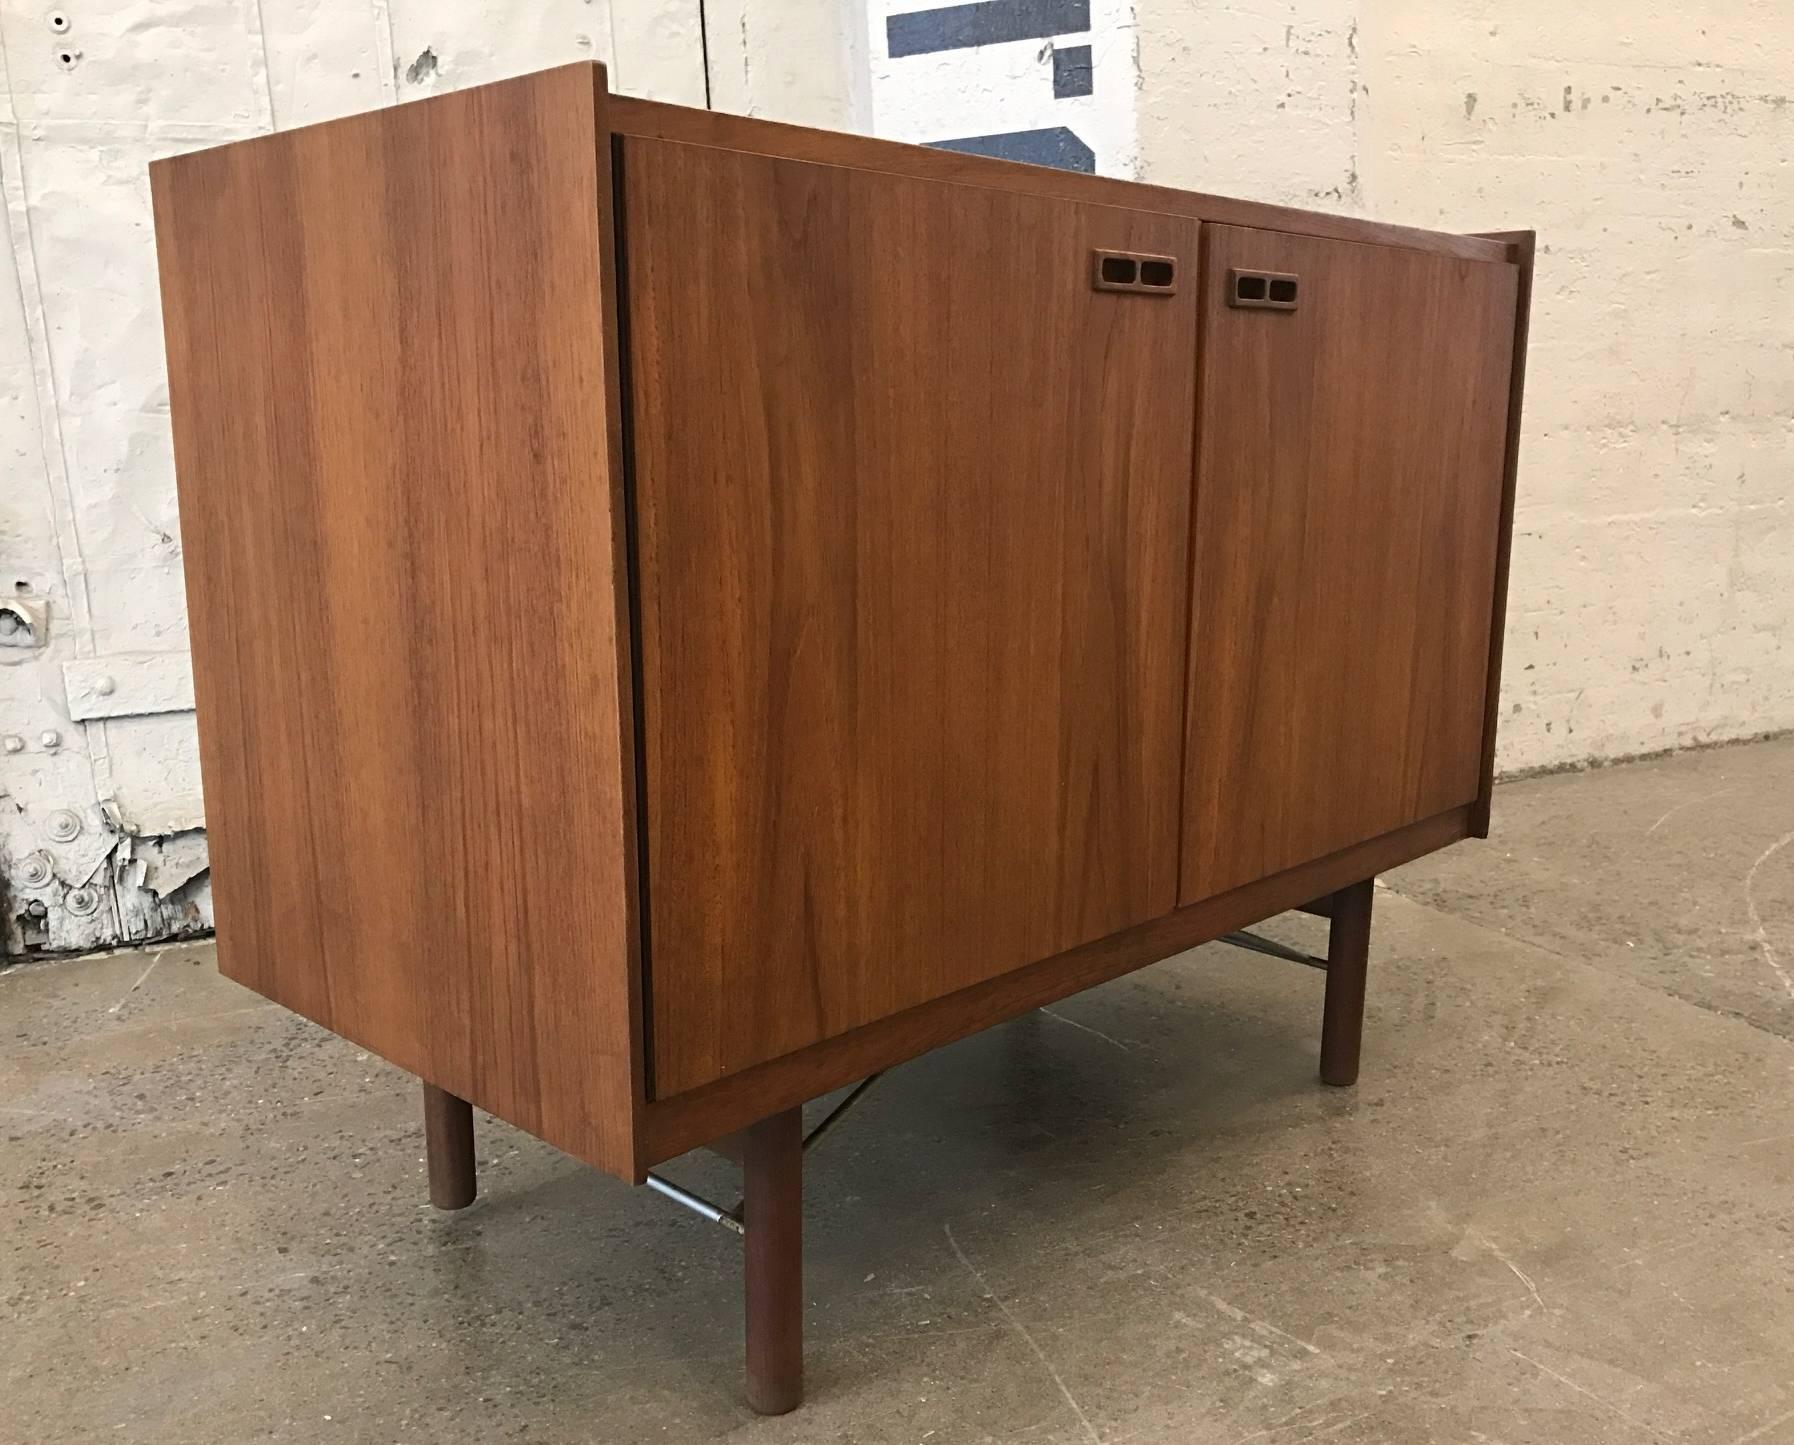 Danish Mid-Century Modern teak cabinet by Kurt Ostervig. Has four sliding drawers, removable shelves and a finished back.